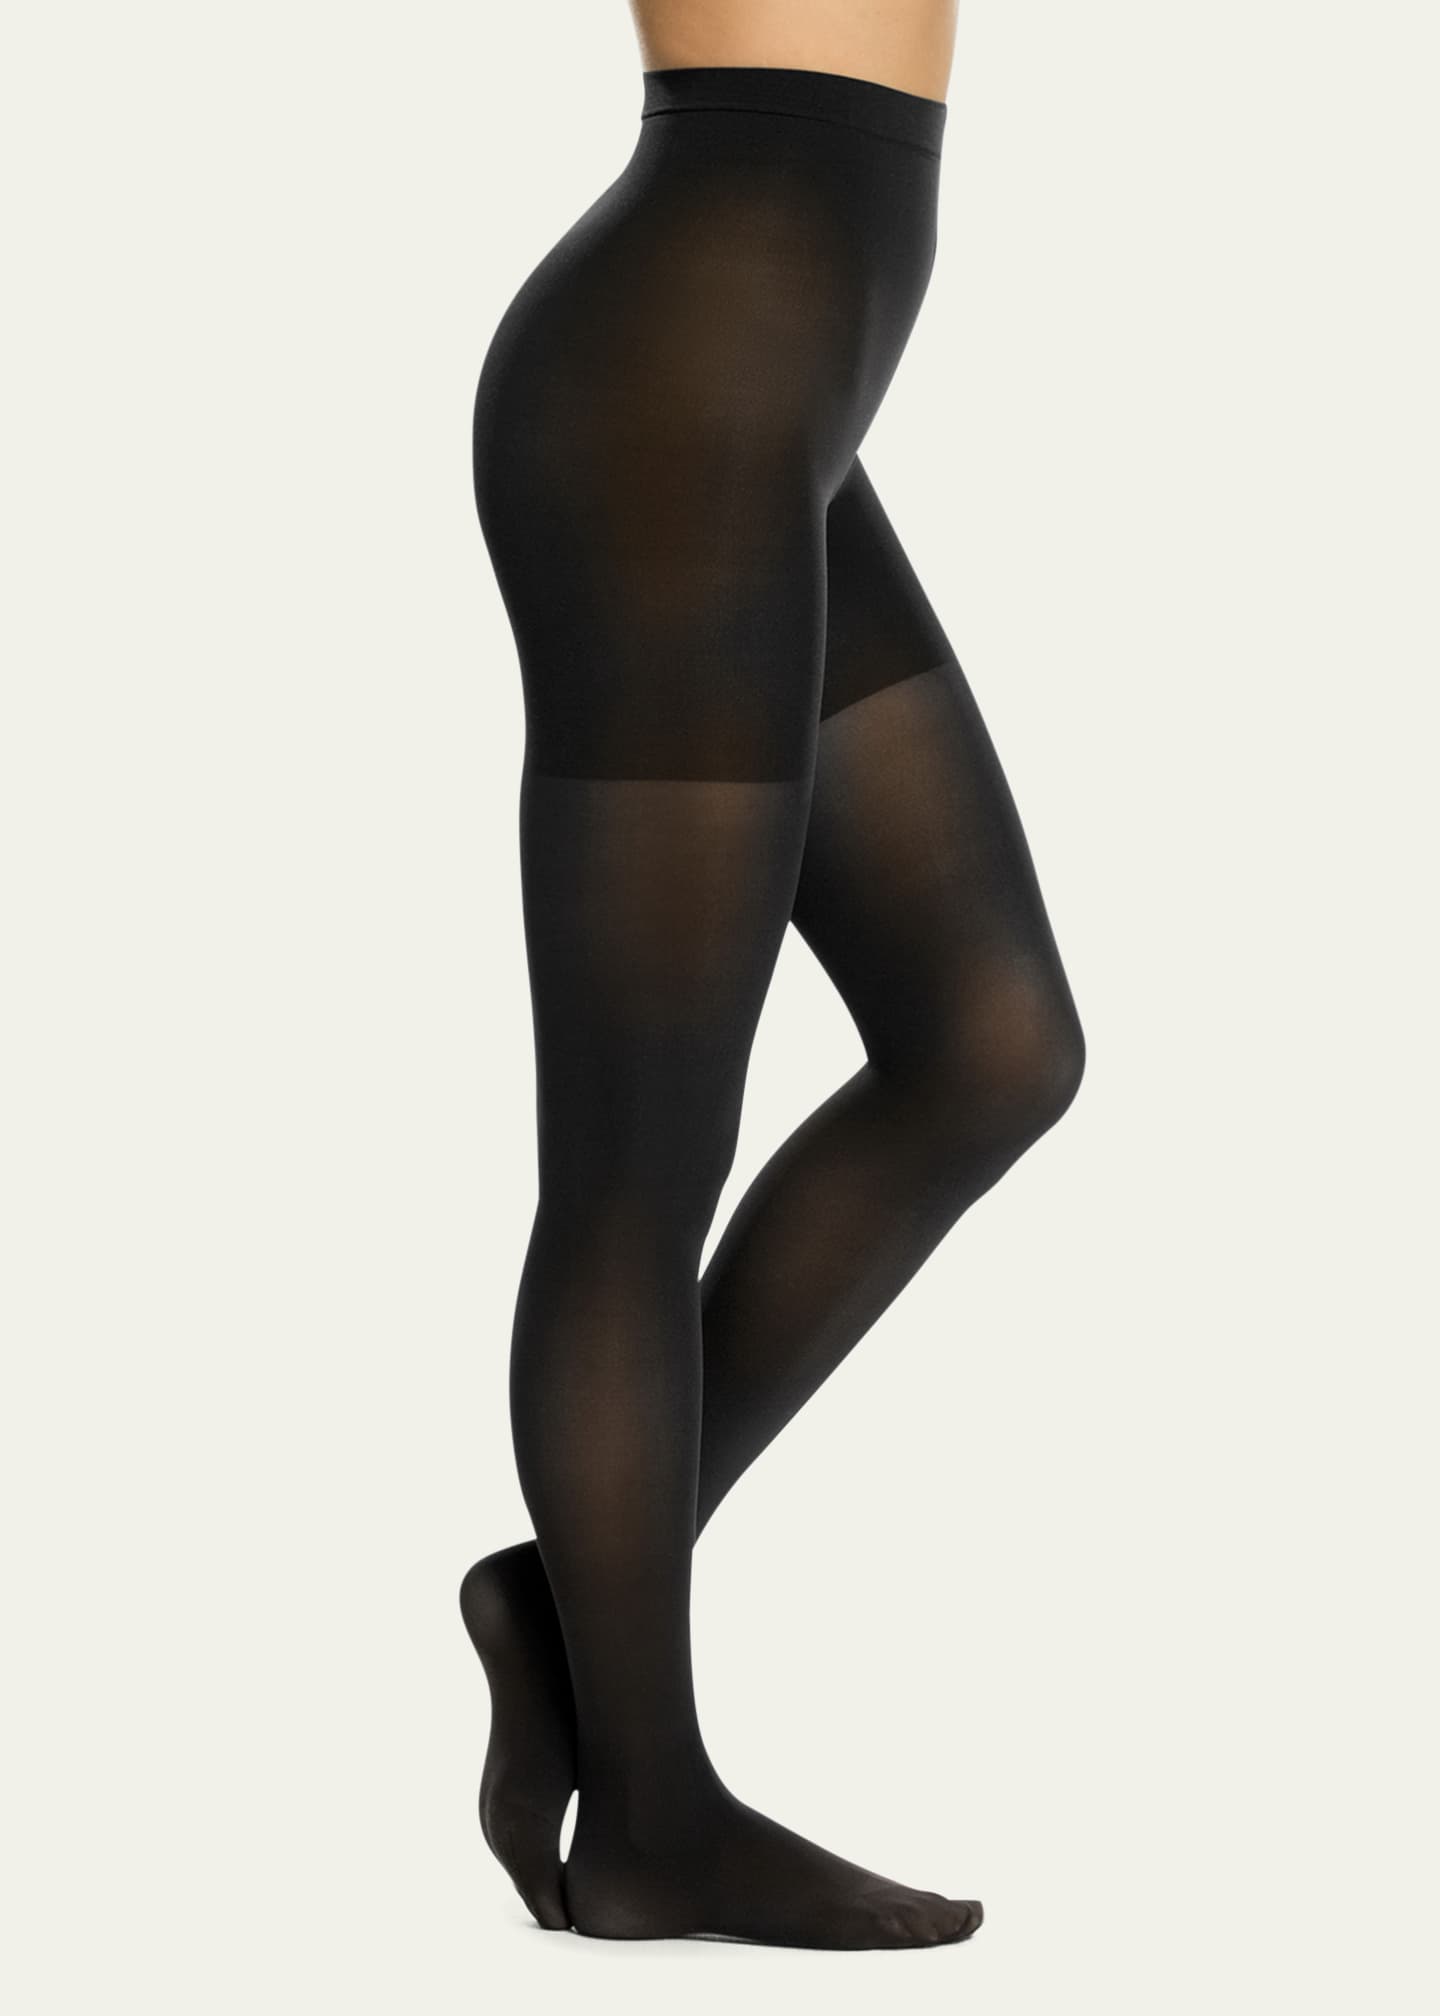 Spanx Luxe Sheer Shaping Tights Image 4 of 4